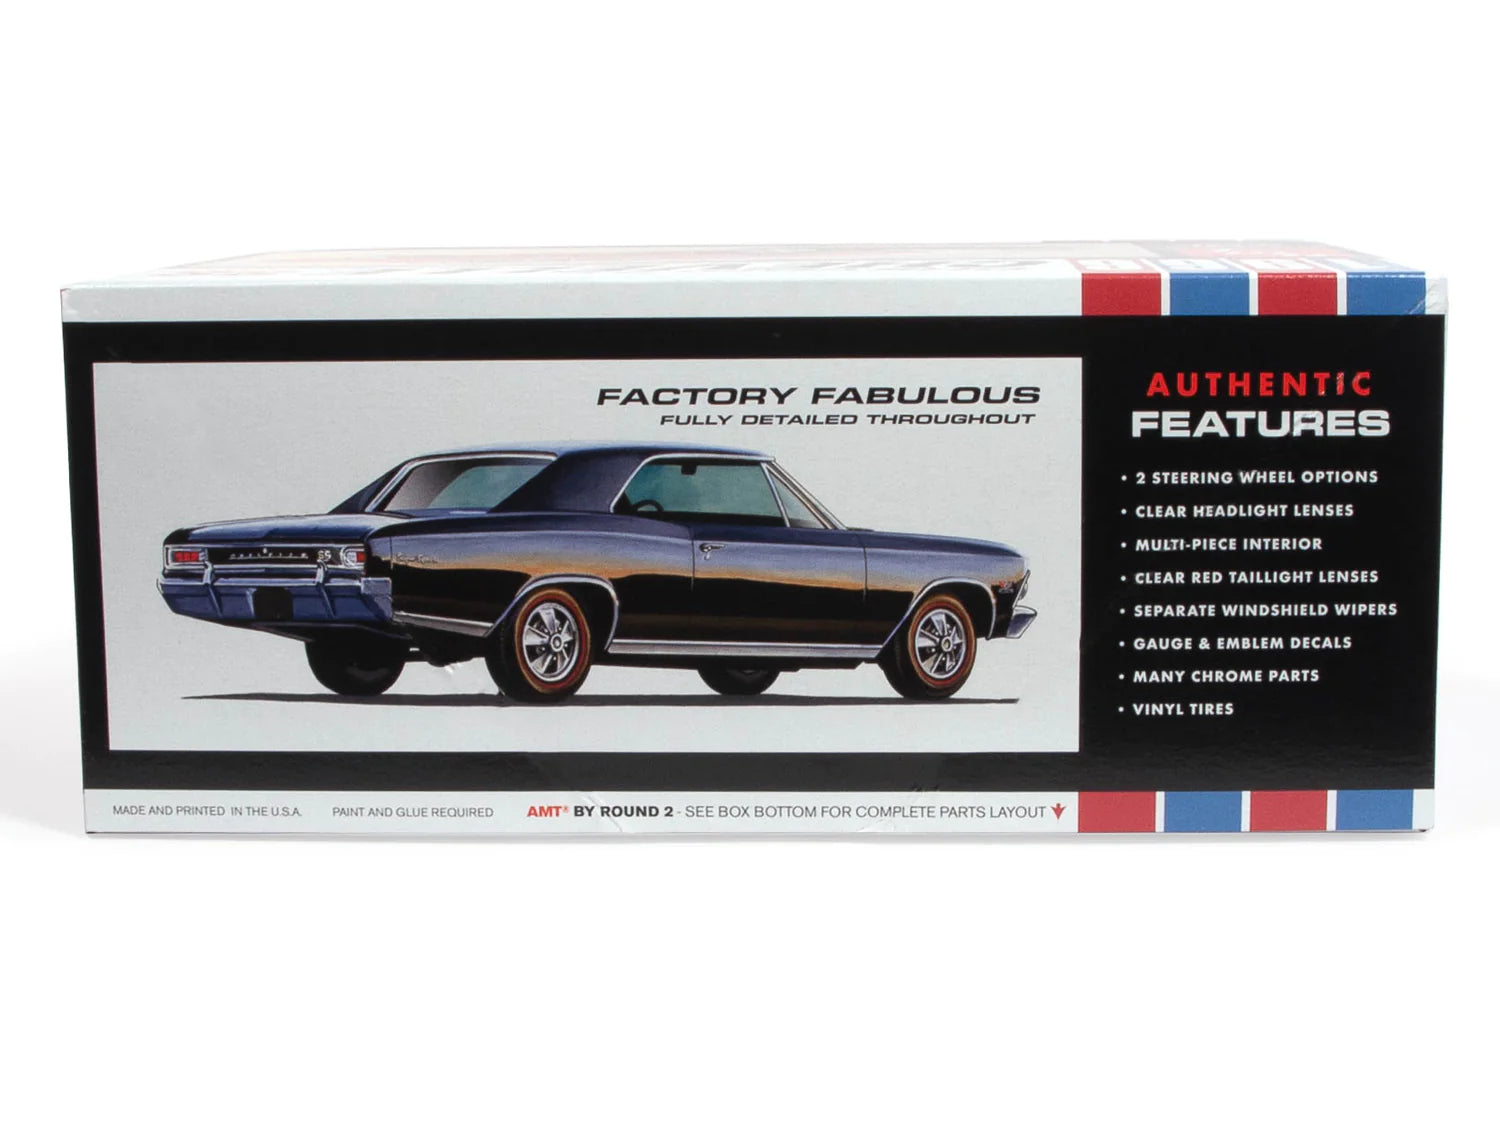 AMT1342 - 1:25 1966 Chevy Chevelle SS